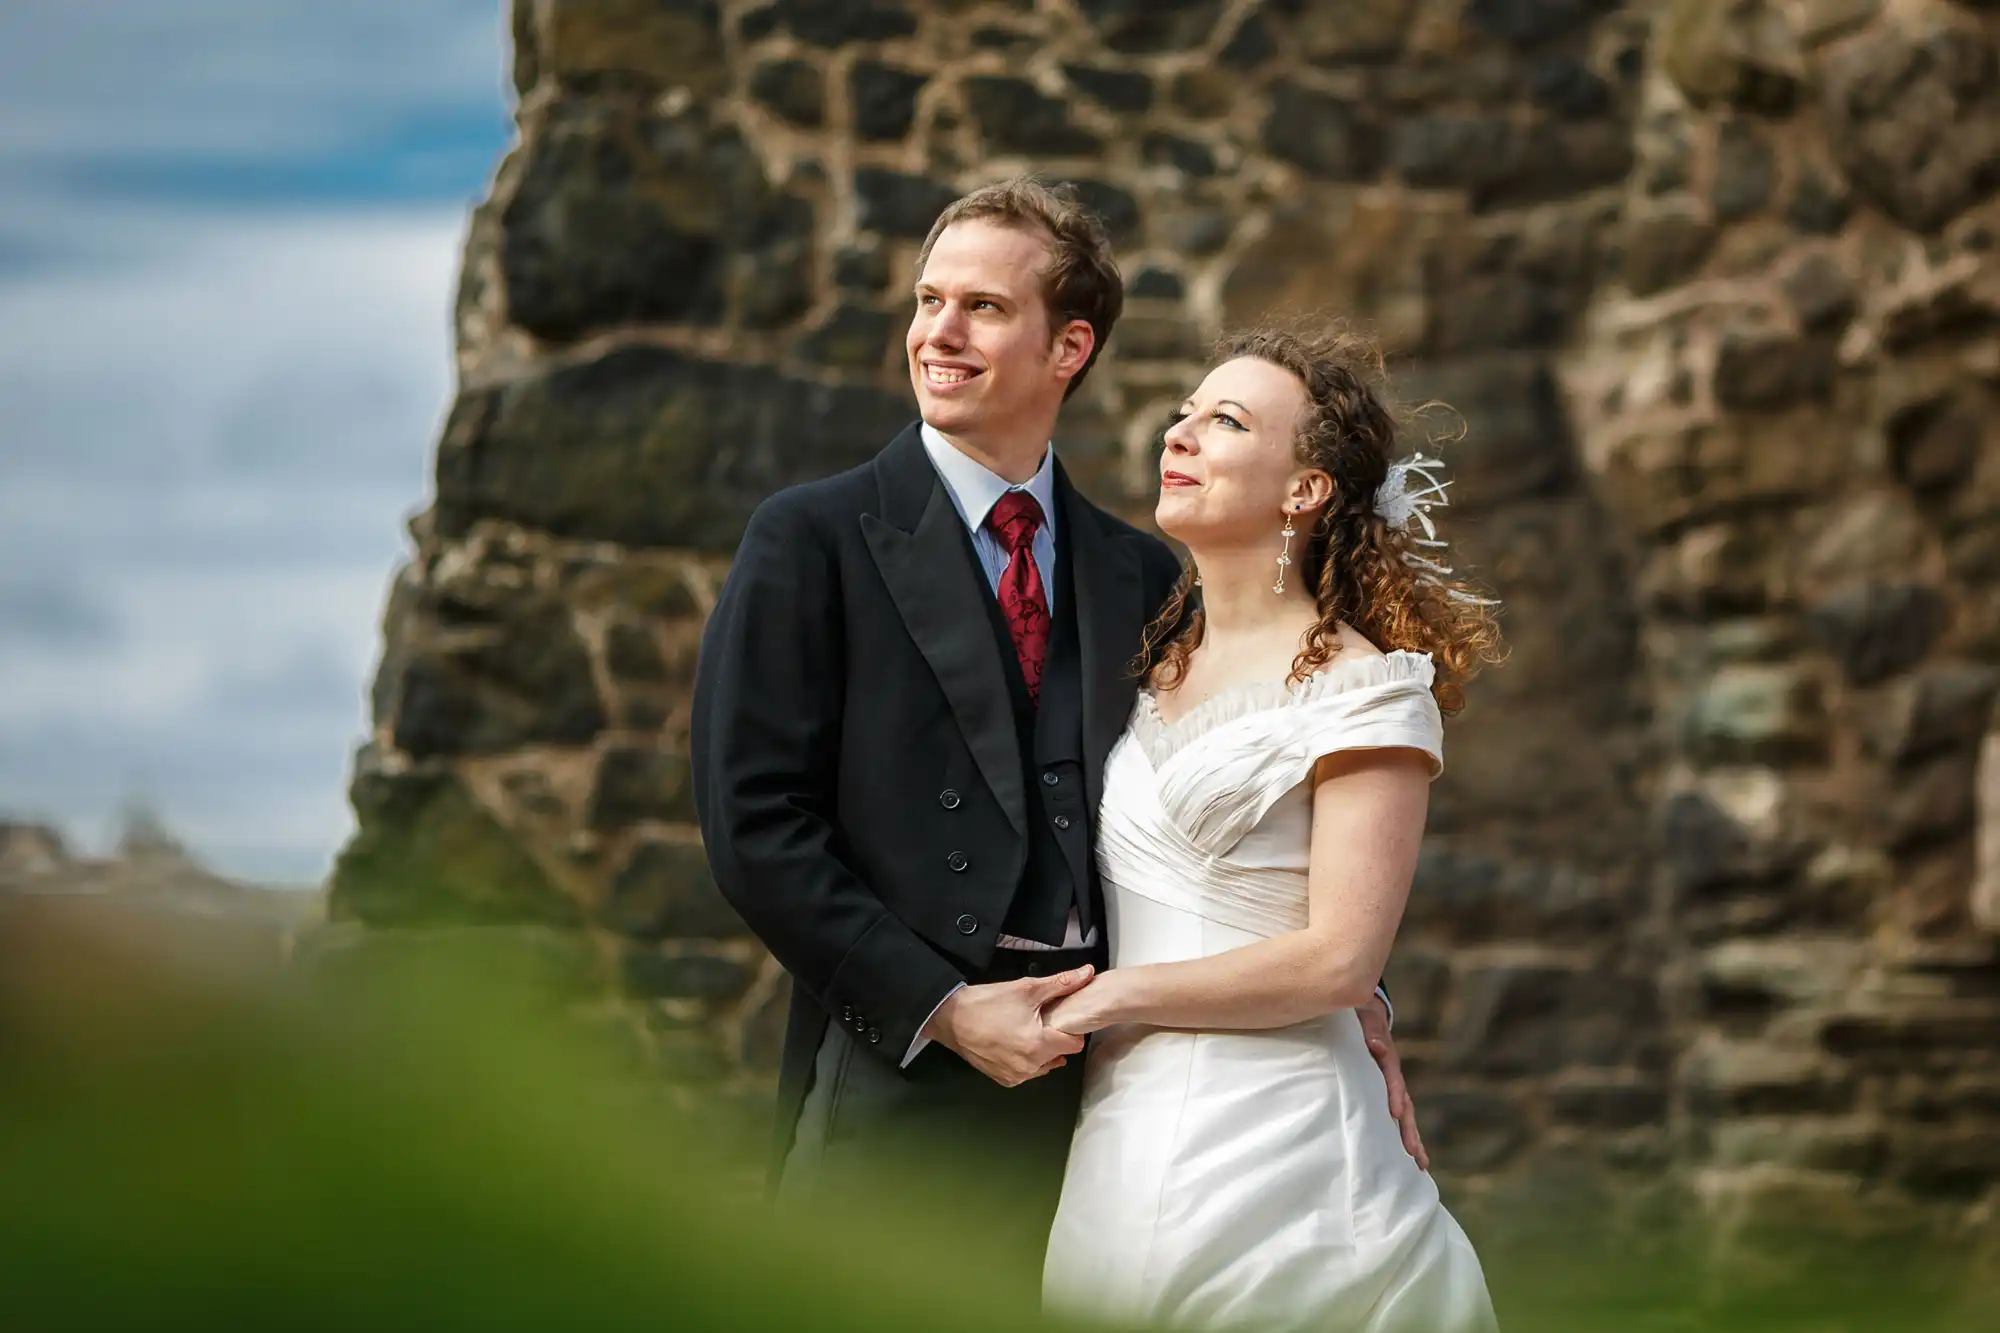 A bride and groom holding hands and smiling, standing outdoors with an old stone structure in the background and greenery in the foreground.